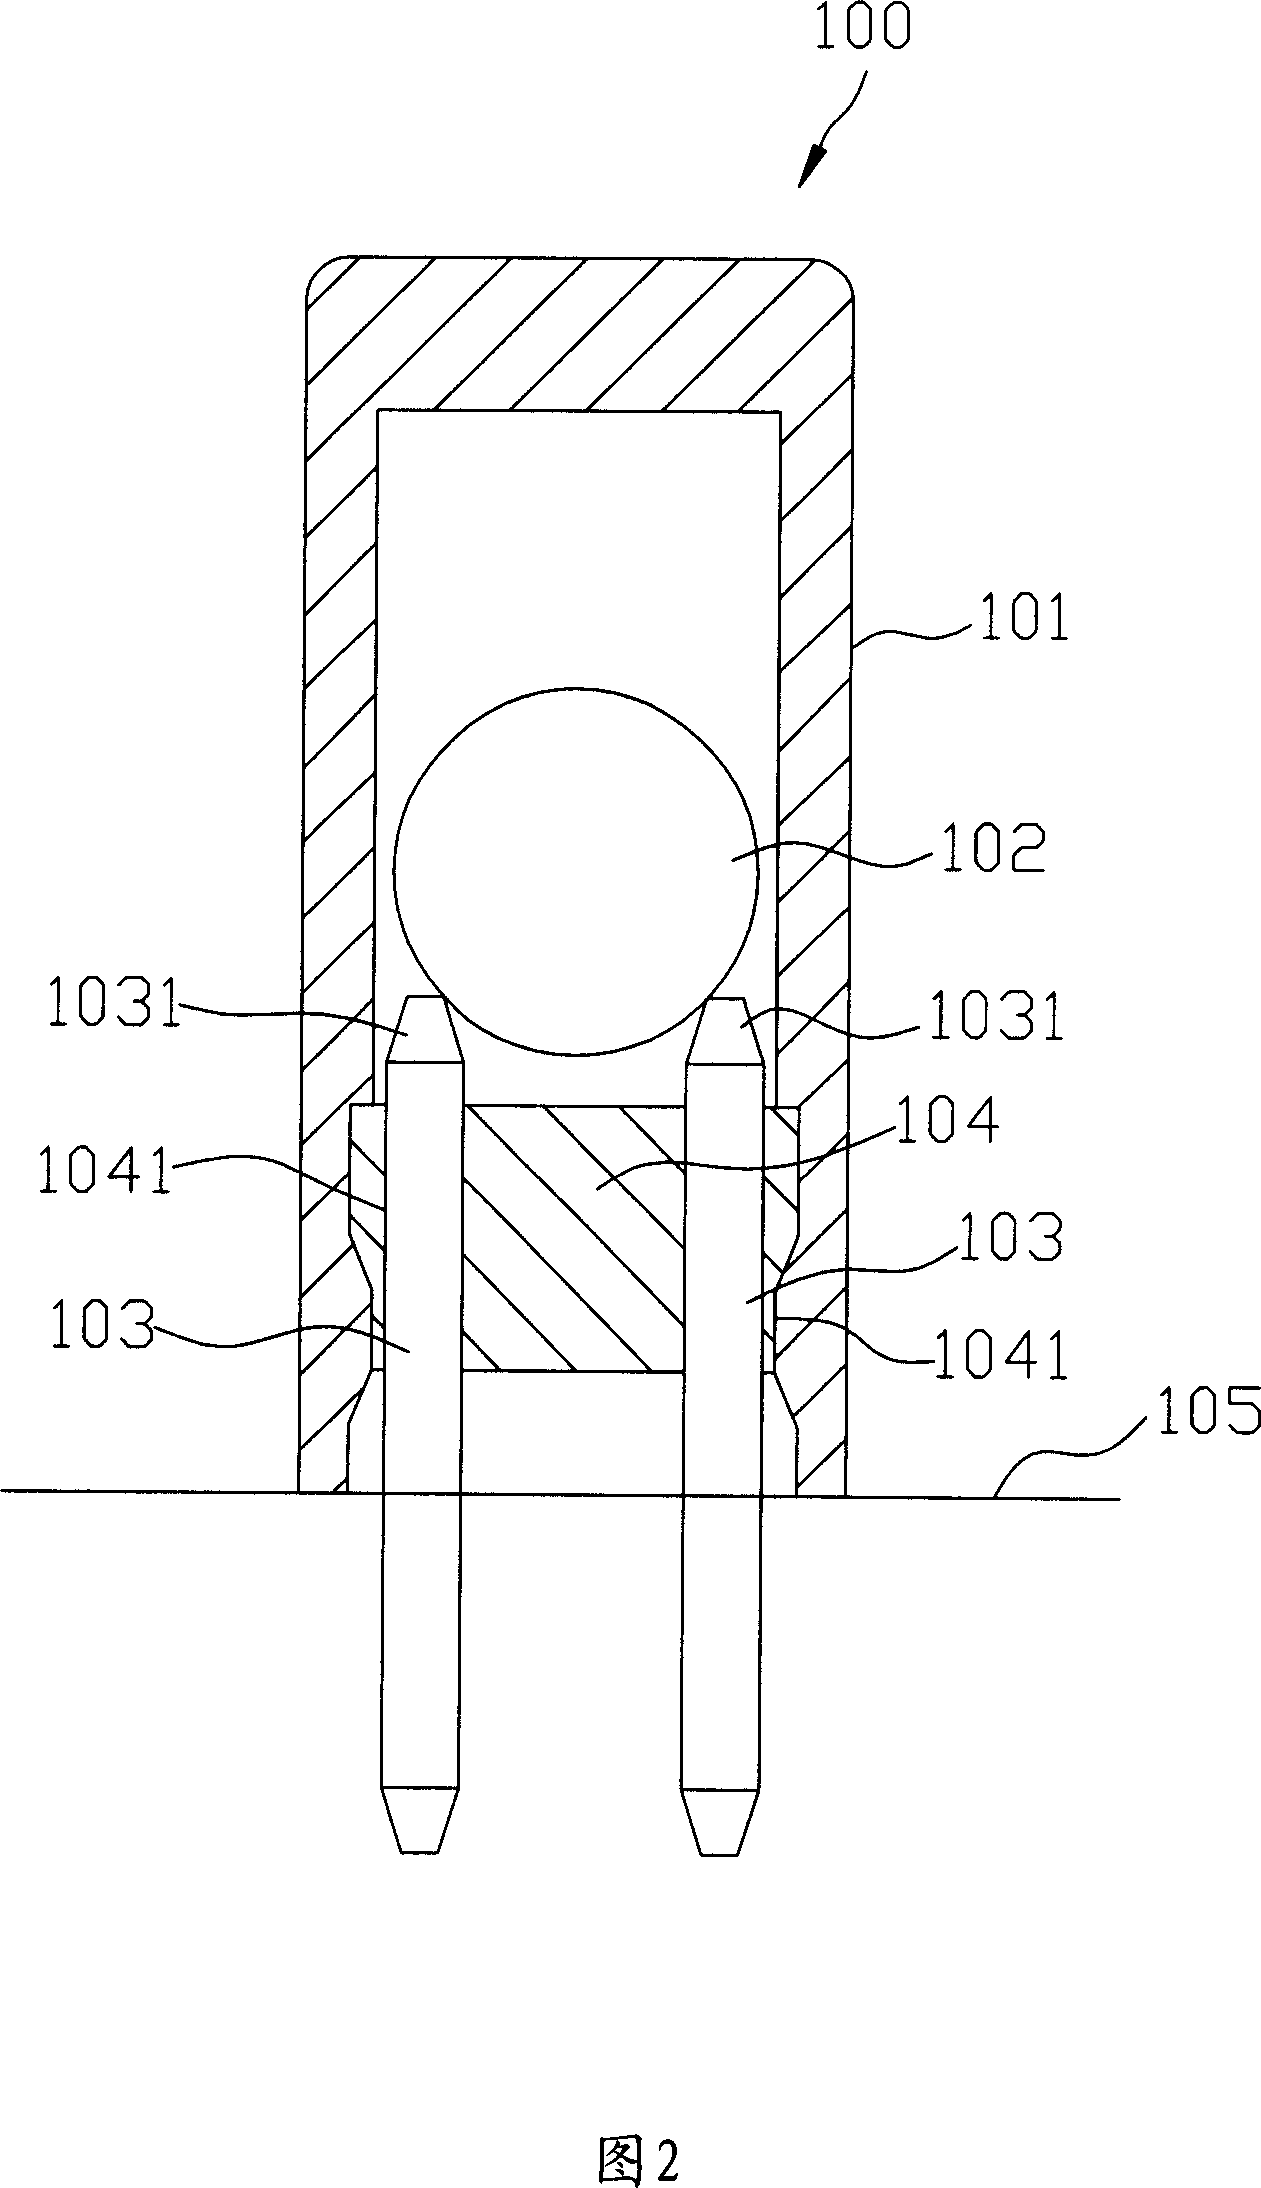 Inductive device